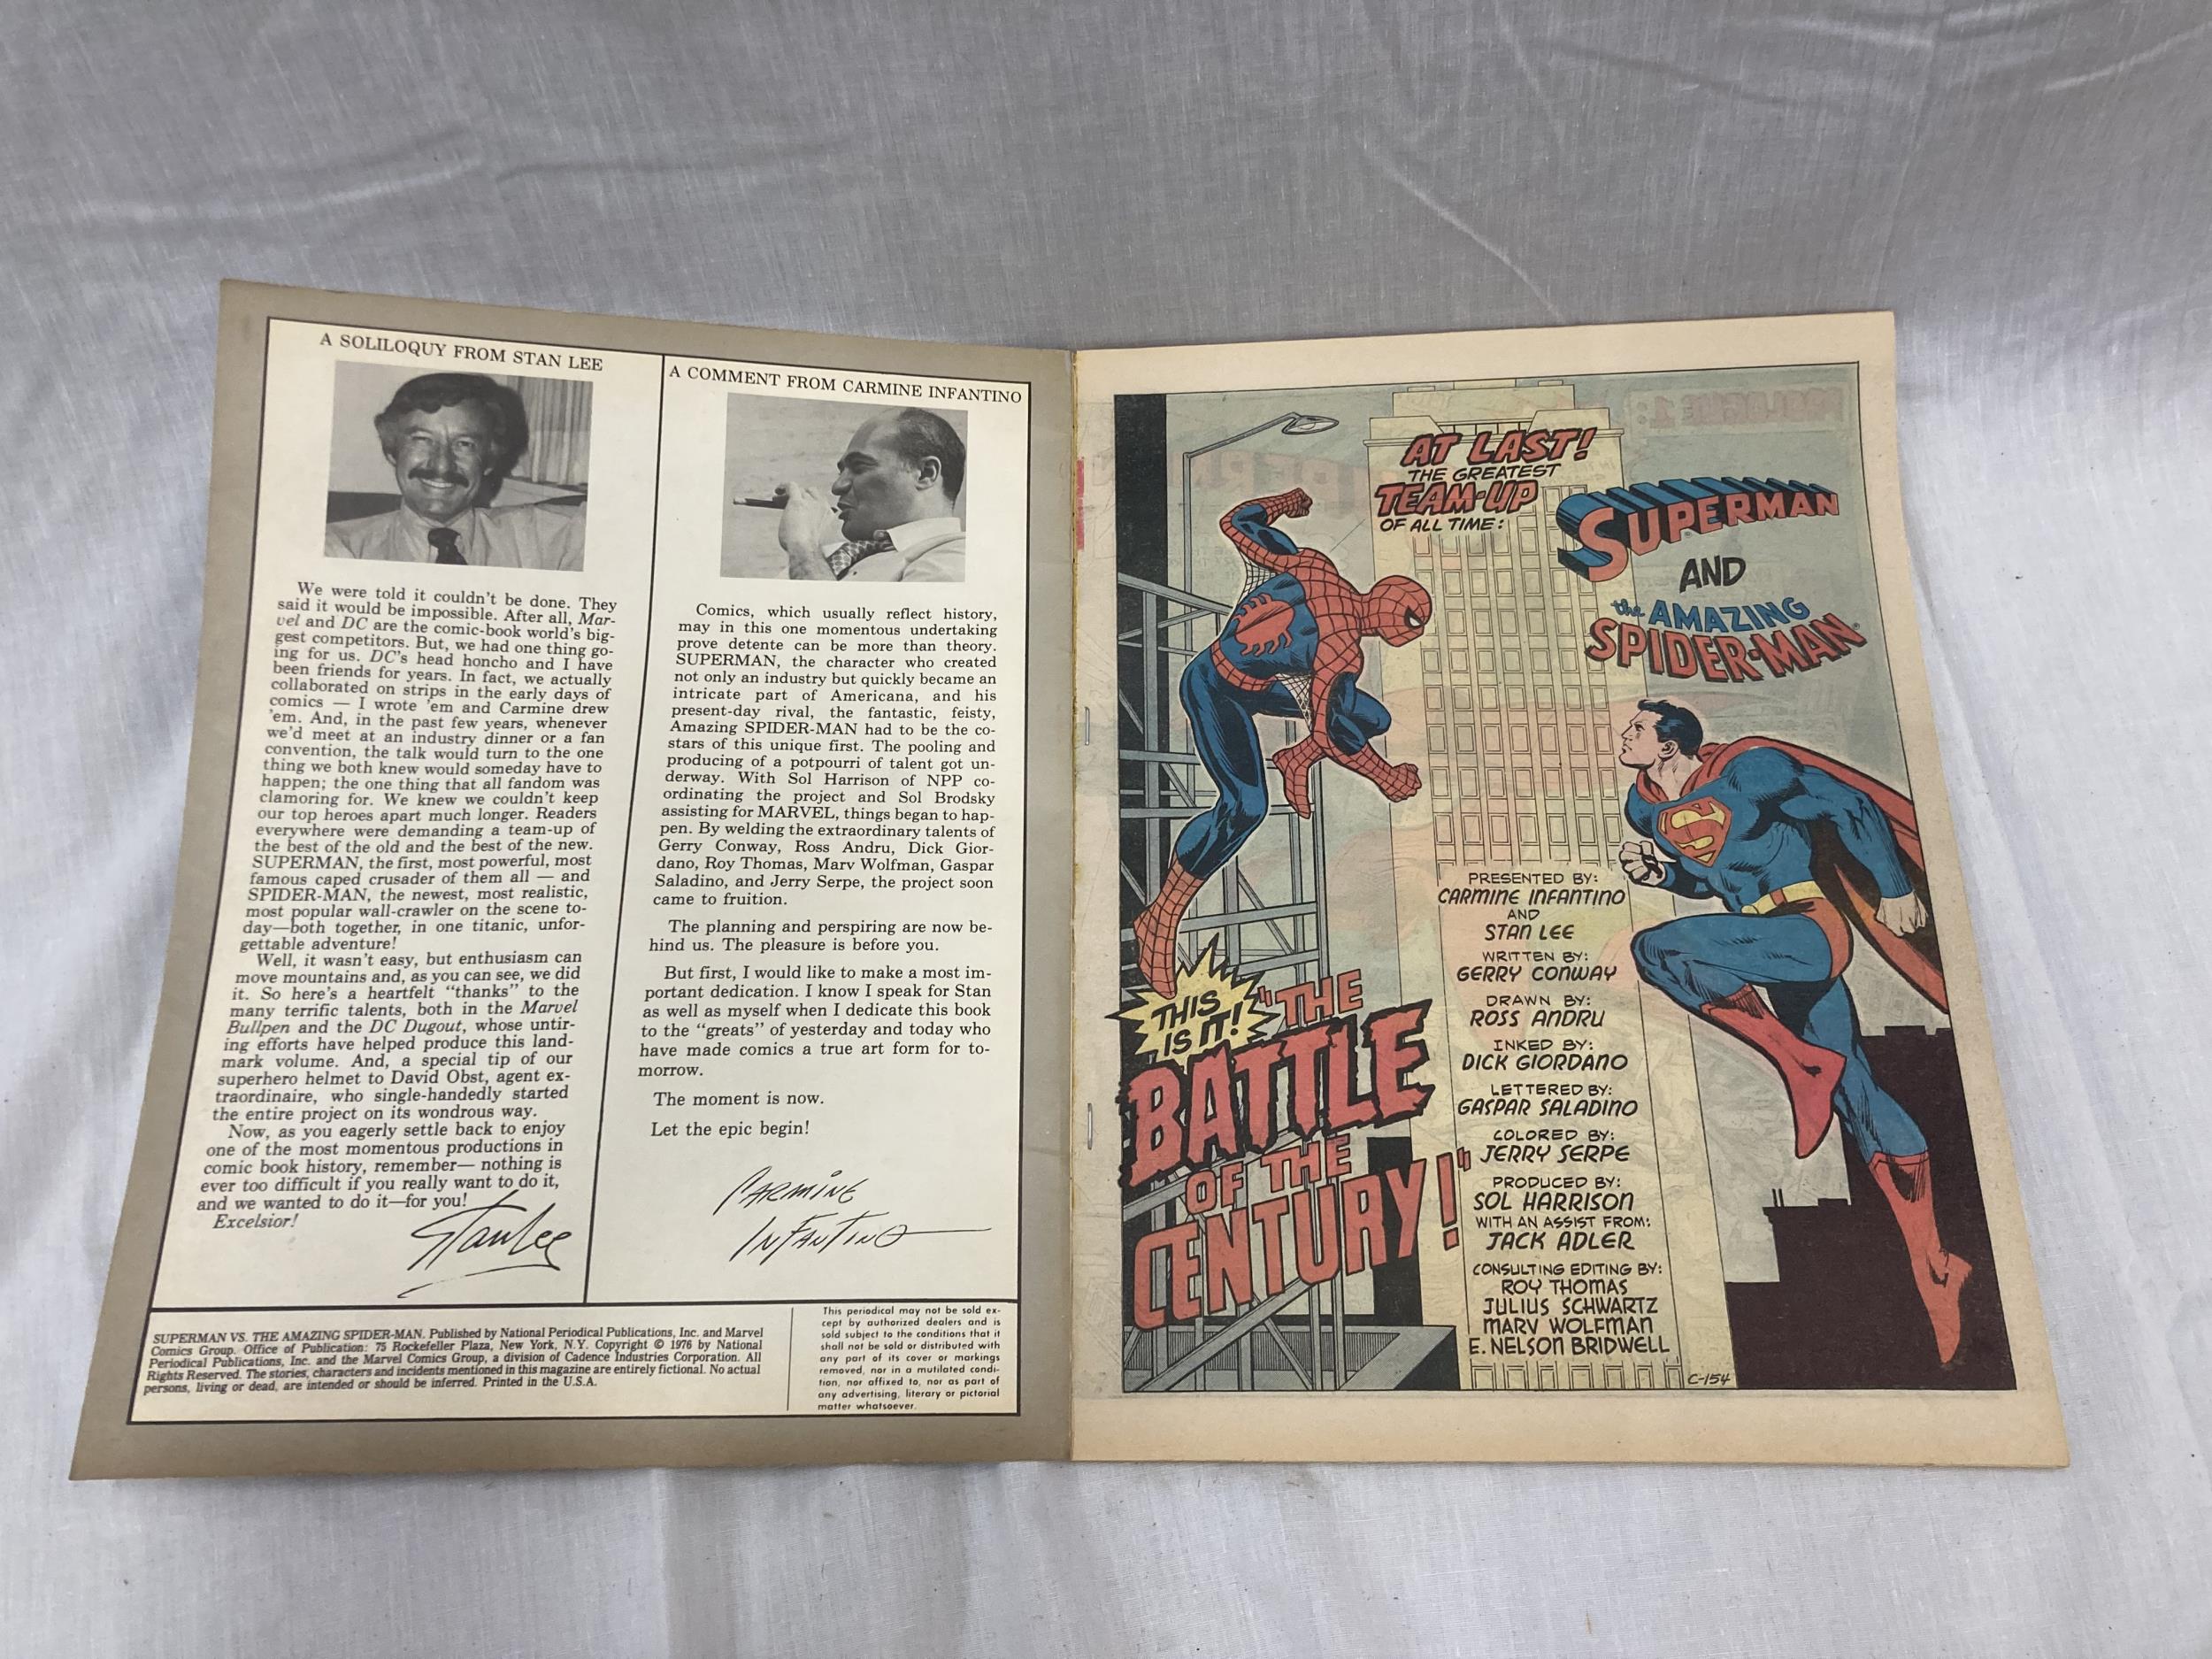 A DC AND MARVEL VINTAGE COMIC THE BATTLE OF THE CENTURY SUPERMAN V SPIDERMAN 1976 - Image 4 of 6